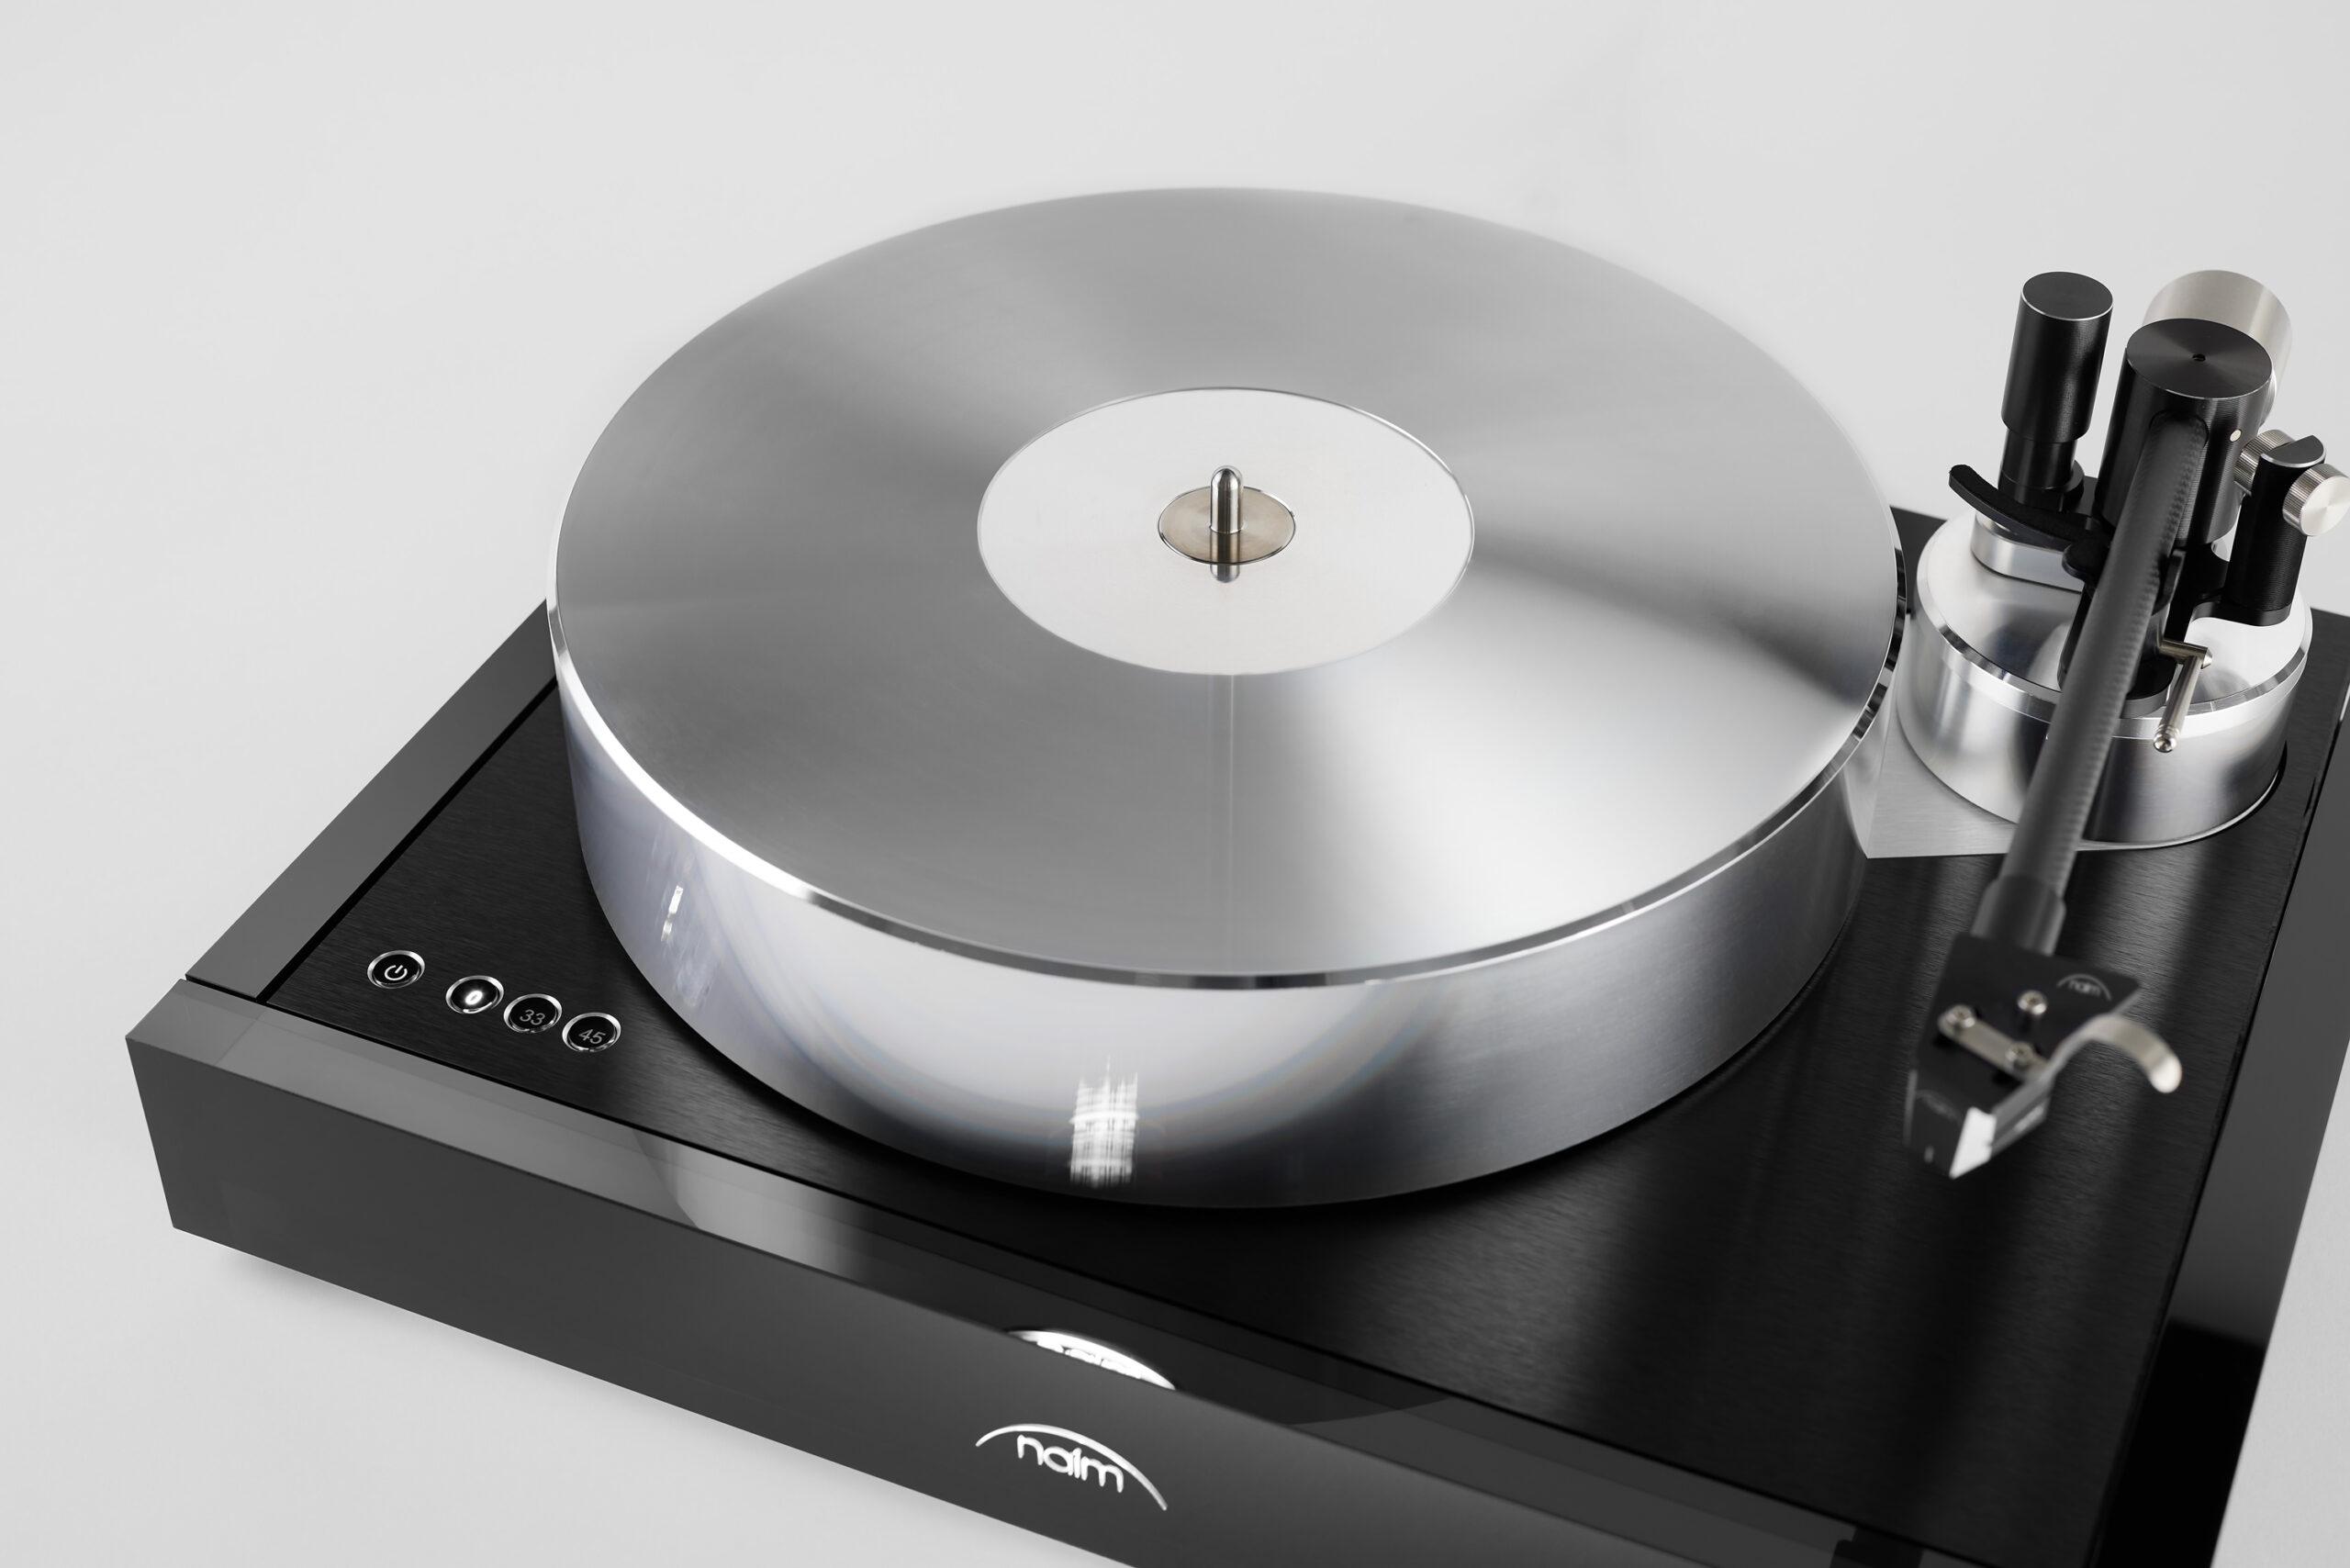 Vinyl-lovers can now finally enjoy the full Naim Audio experience with the launch of Solstice, the first turntable in the British brand’s almost 50-year history.